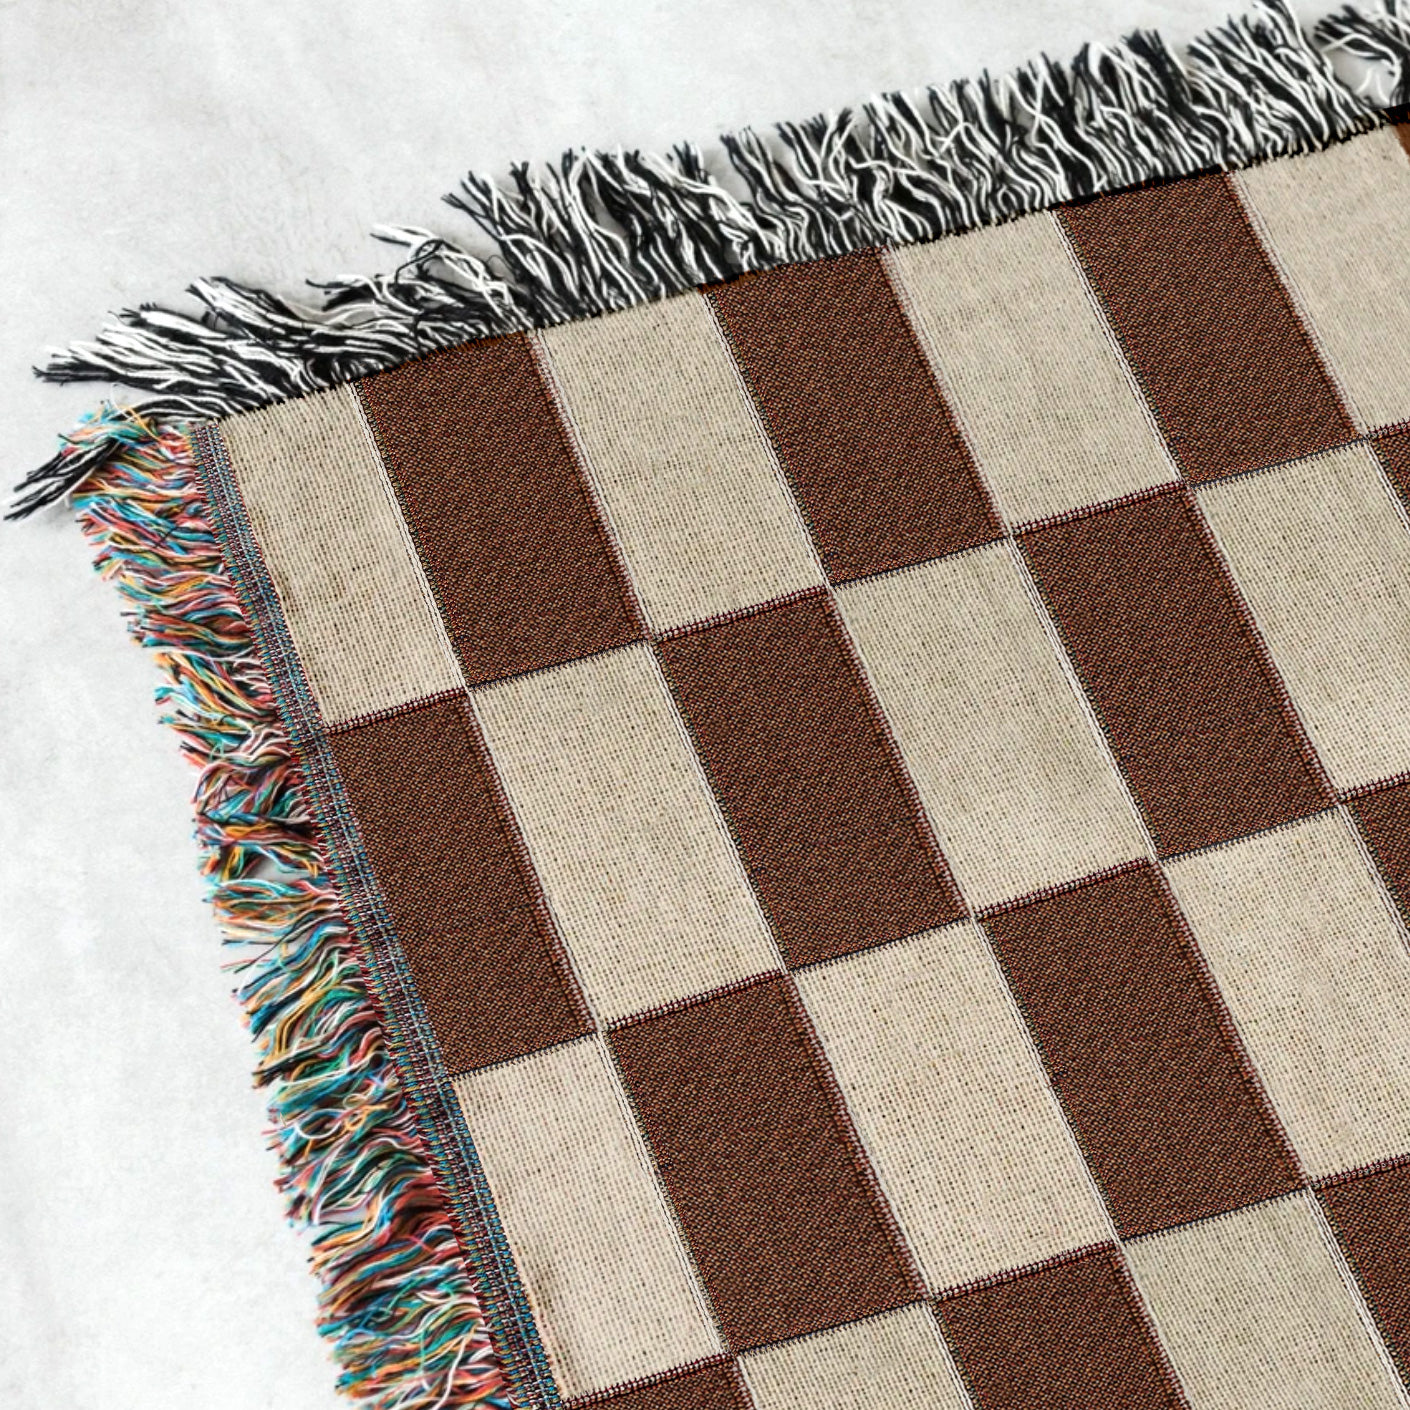 Checkers woven throw blanket. 06